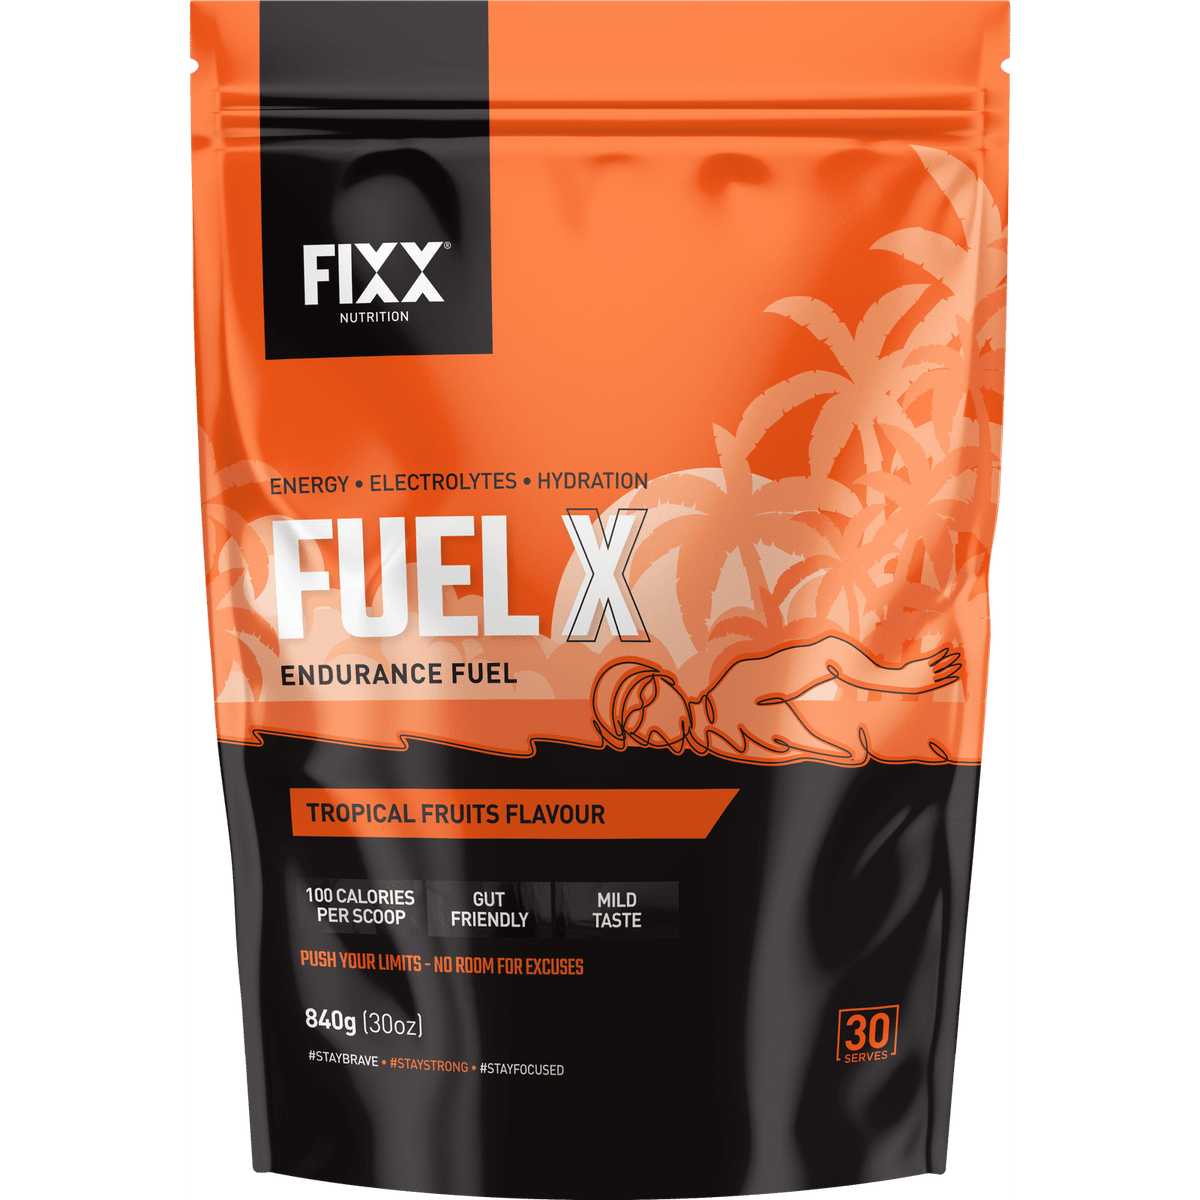 Fixx Nutrition - Fuel X Endurance Fuel - 55g NUTRITION - Energy and Recovery Gels 840g